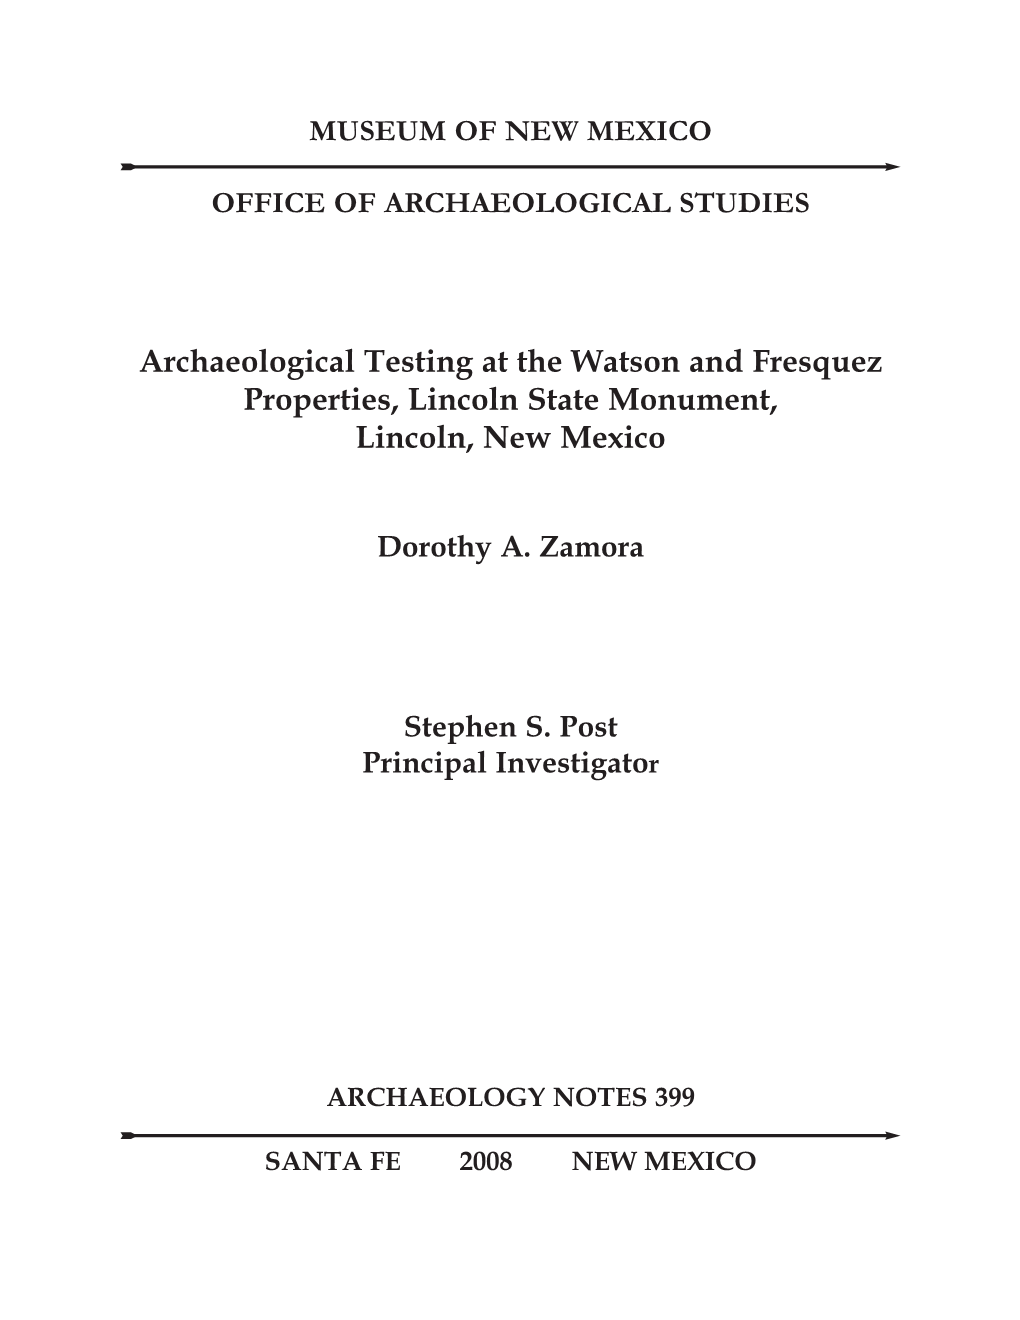 Archaeological Testing at the Watson and Fresquez Properties, Lincoln State Monument, Lincoln, New Mexico